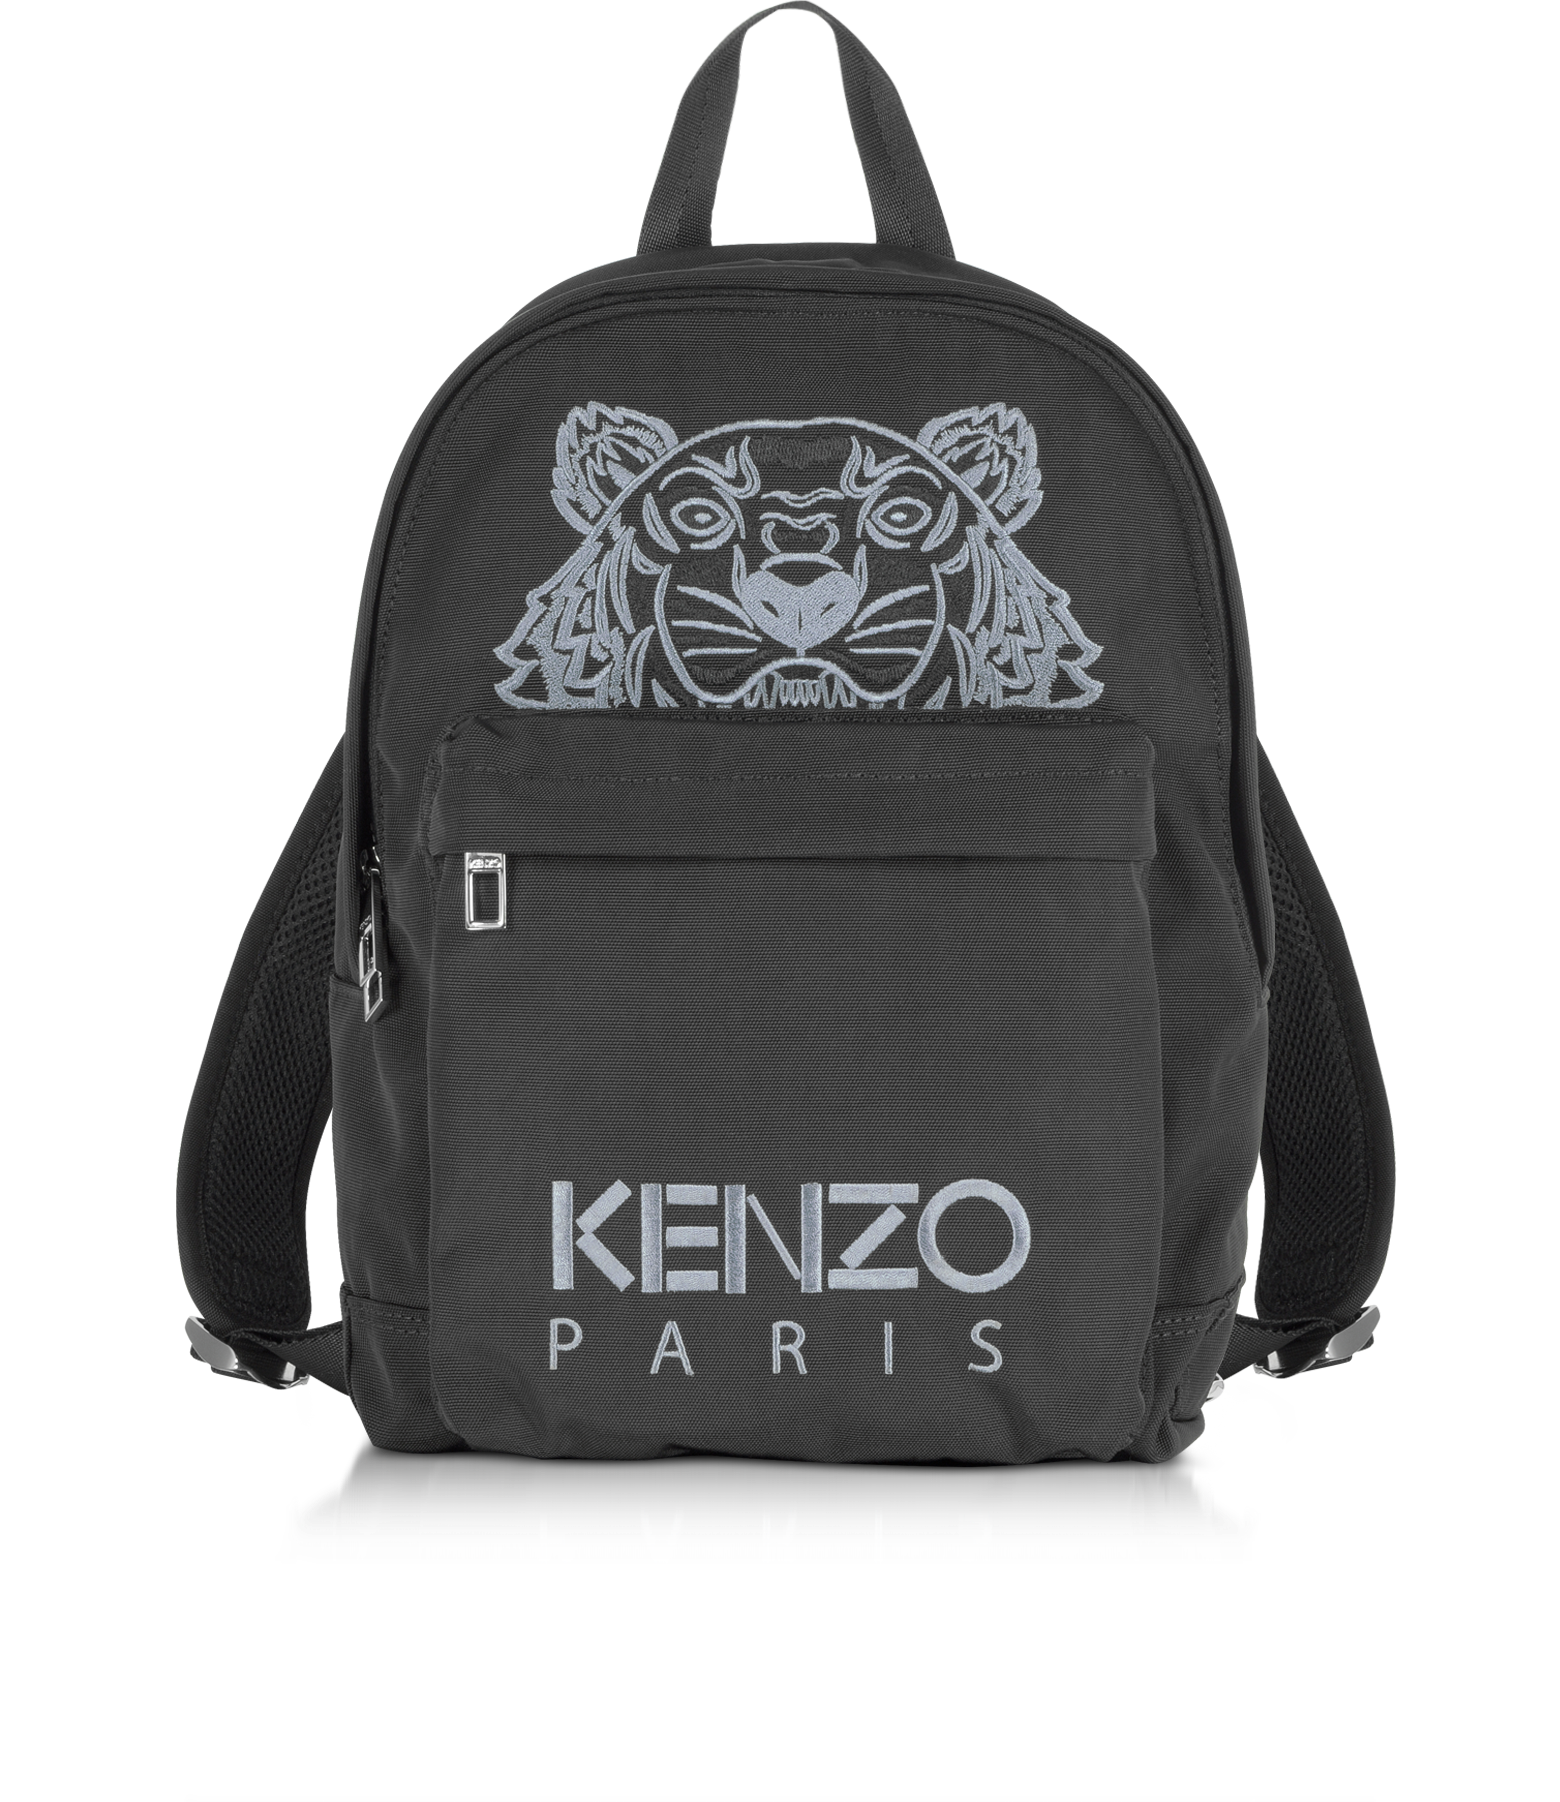 kenzo tiger canvas backpack